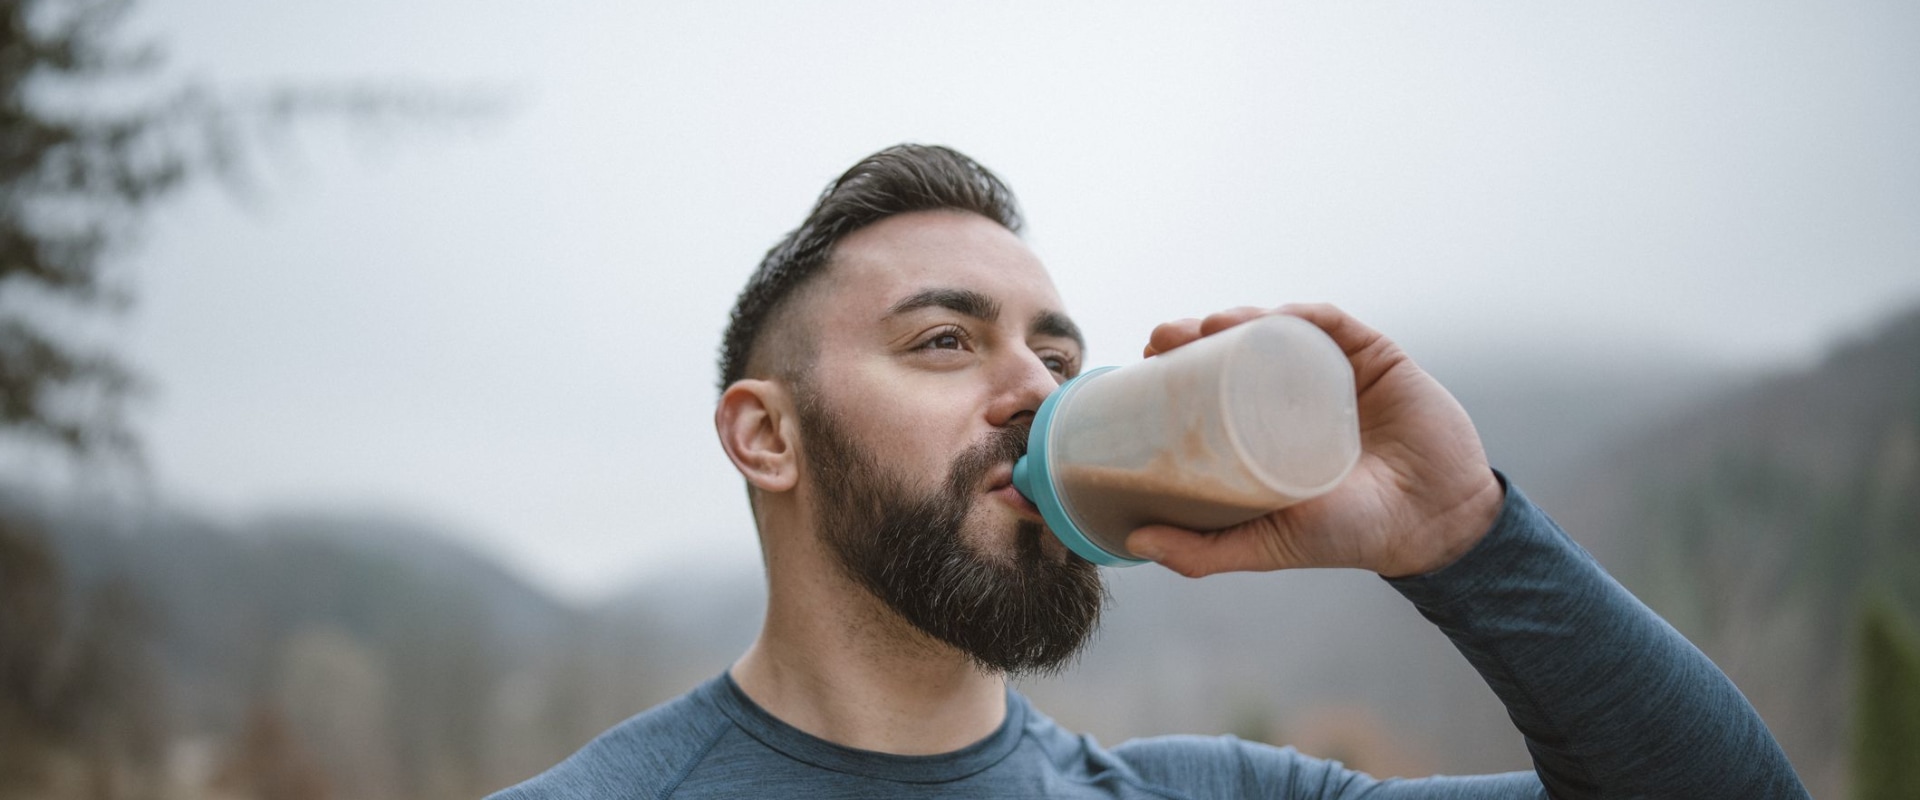 How Much Protein Powder Should I Take a Day?